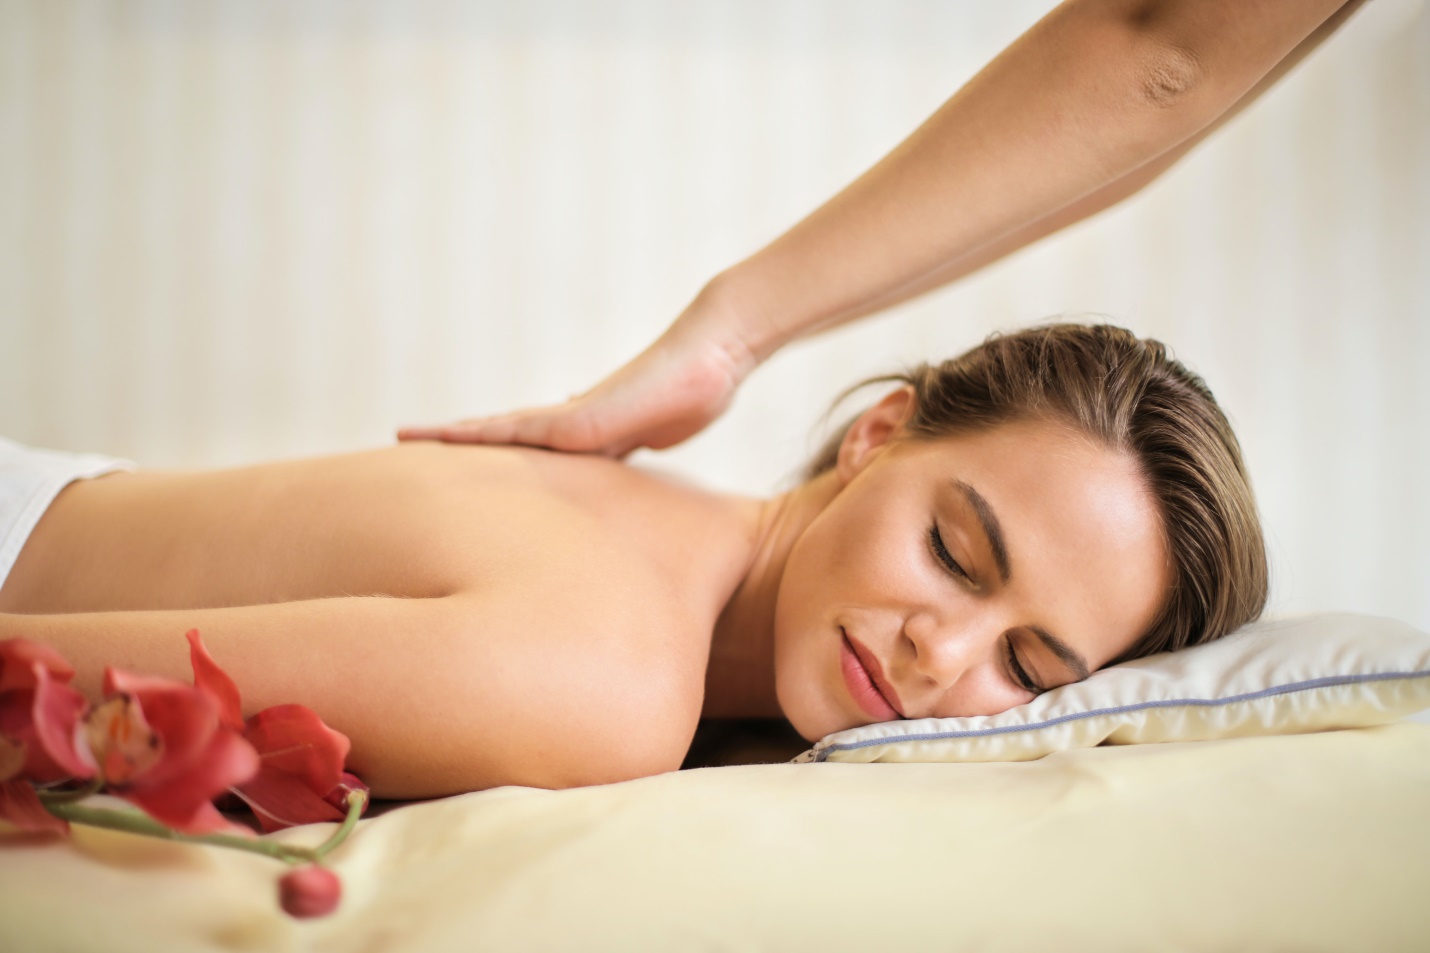 Pampering Perfection: How To Find The Perfect Swedish Massage Therapist